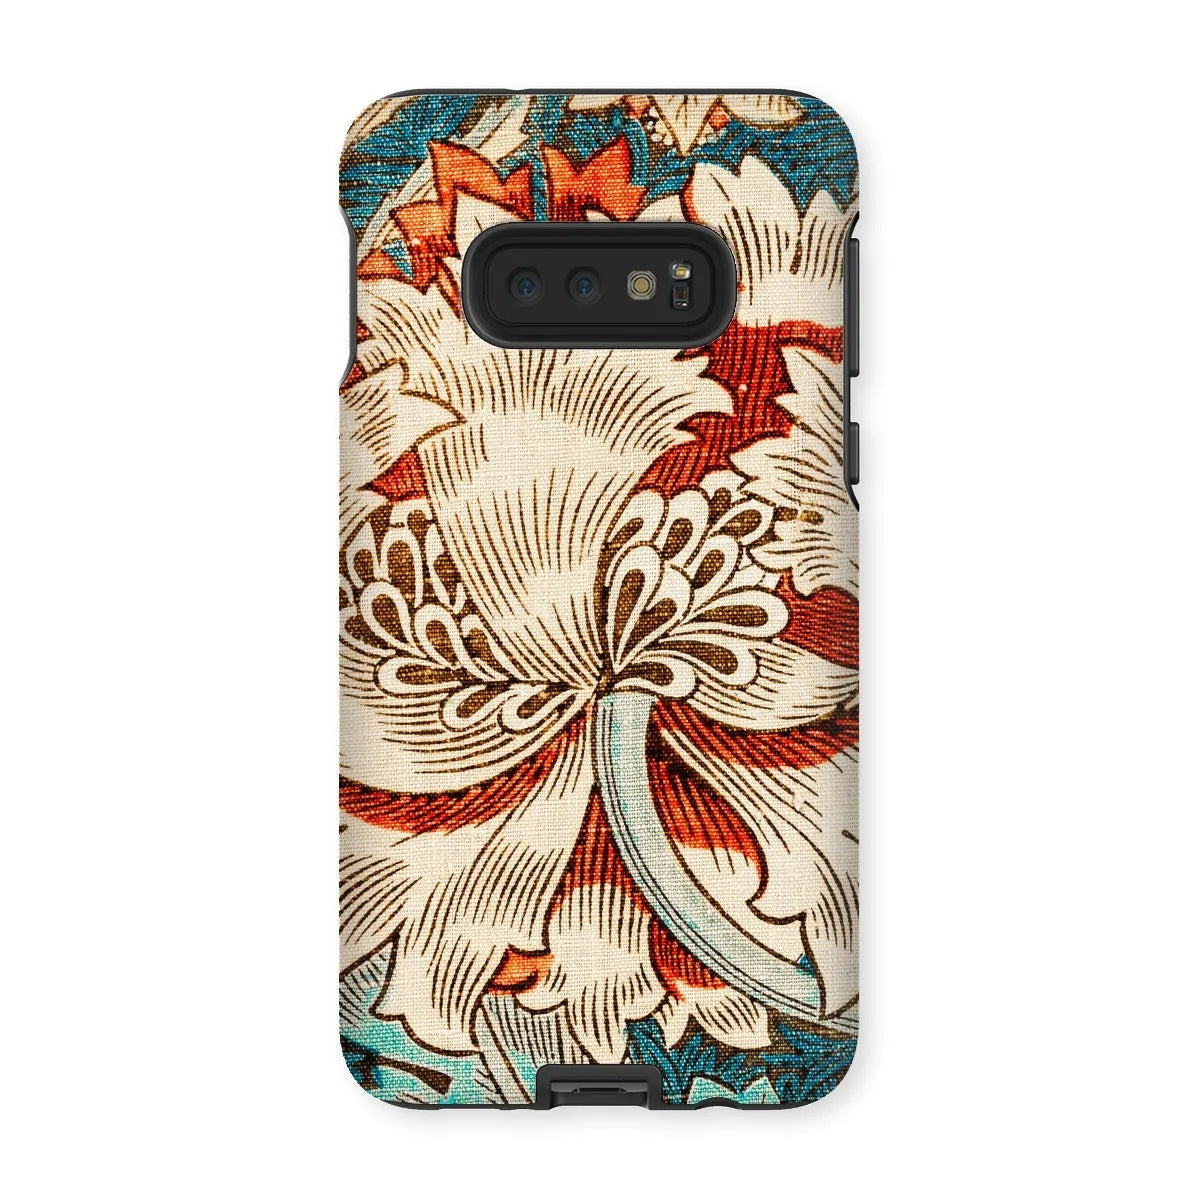 Honeysuckle Too By William Morris Phone Case - Samsung Galaxy S10e / Matte - Mobile Phone Cases - Aesthetic Art